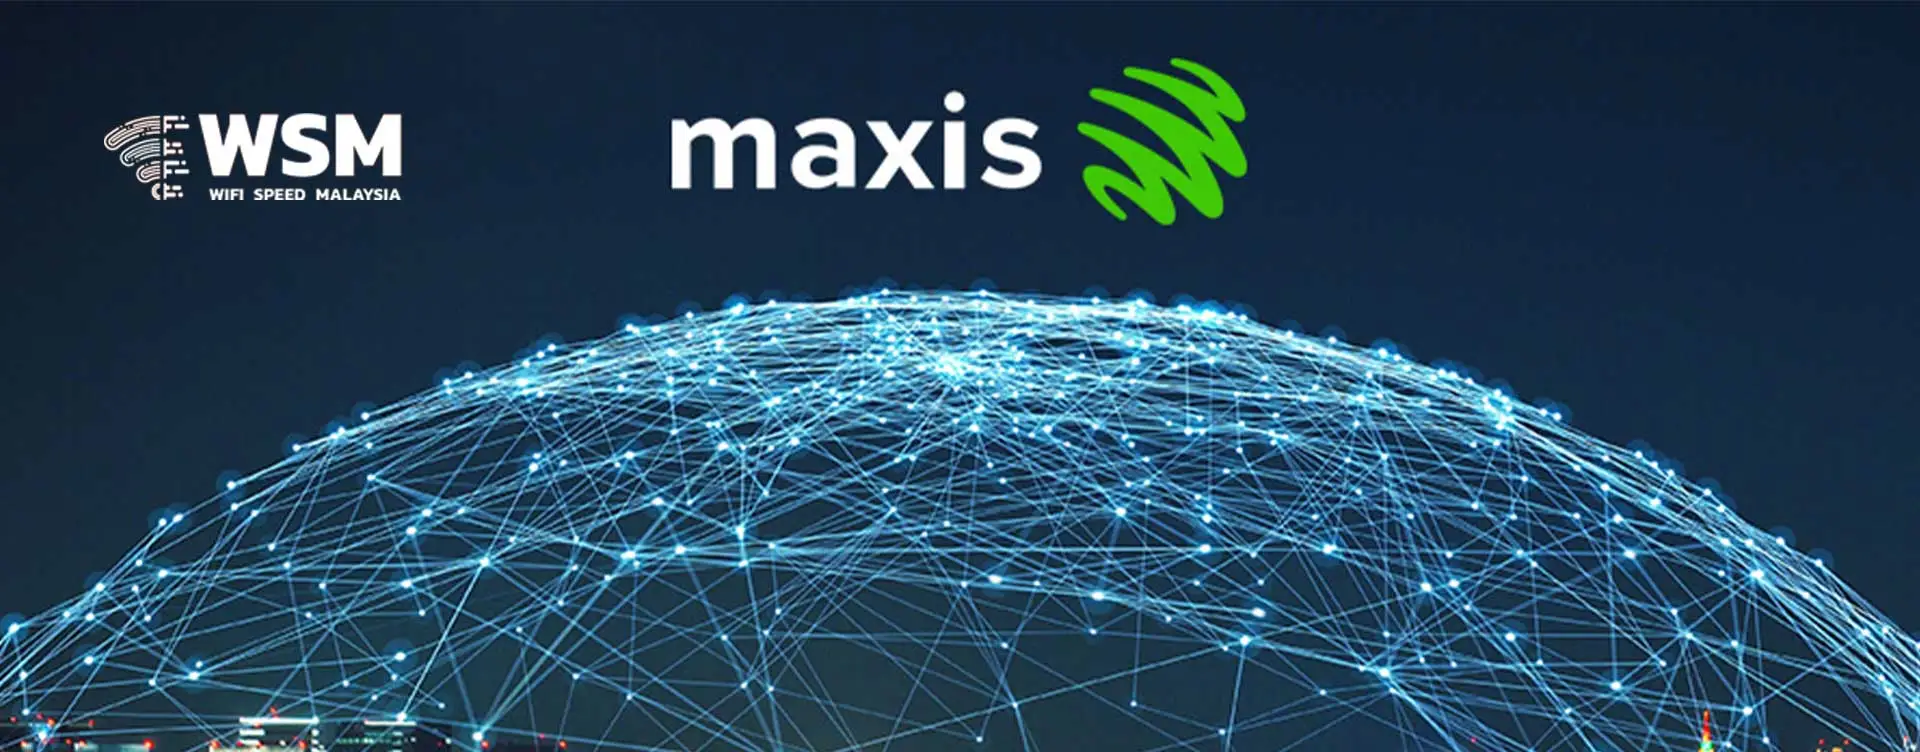 Maxis-promised-to-roll-out-5G-across-the-country.1